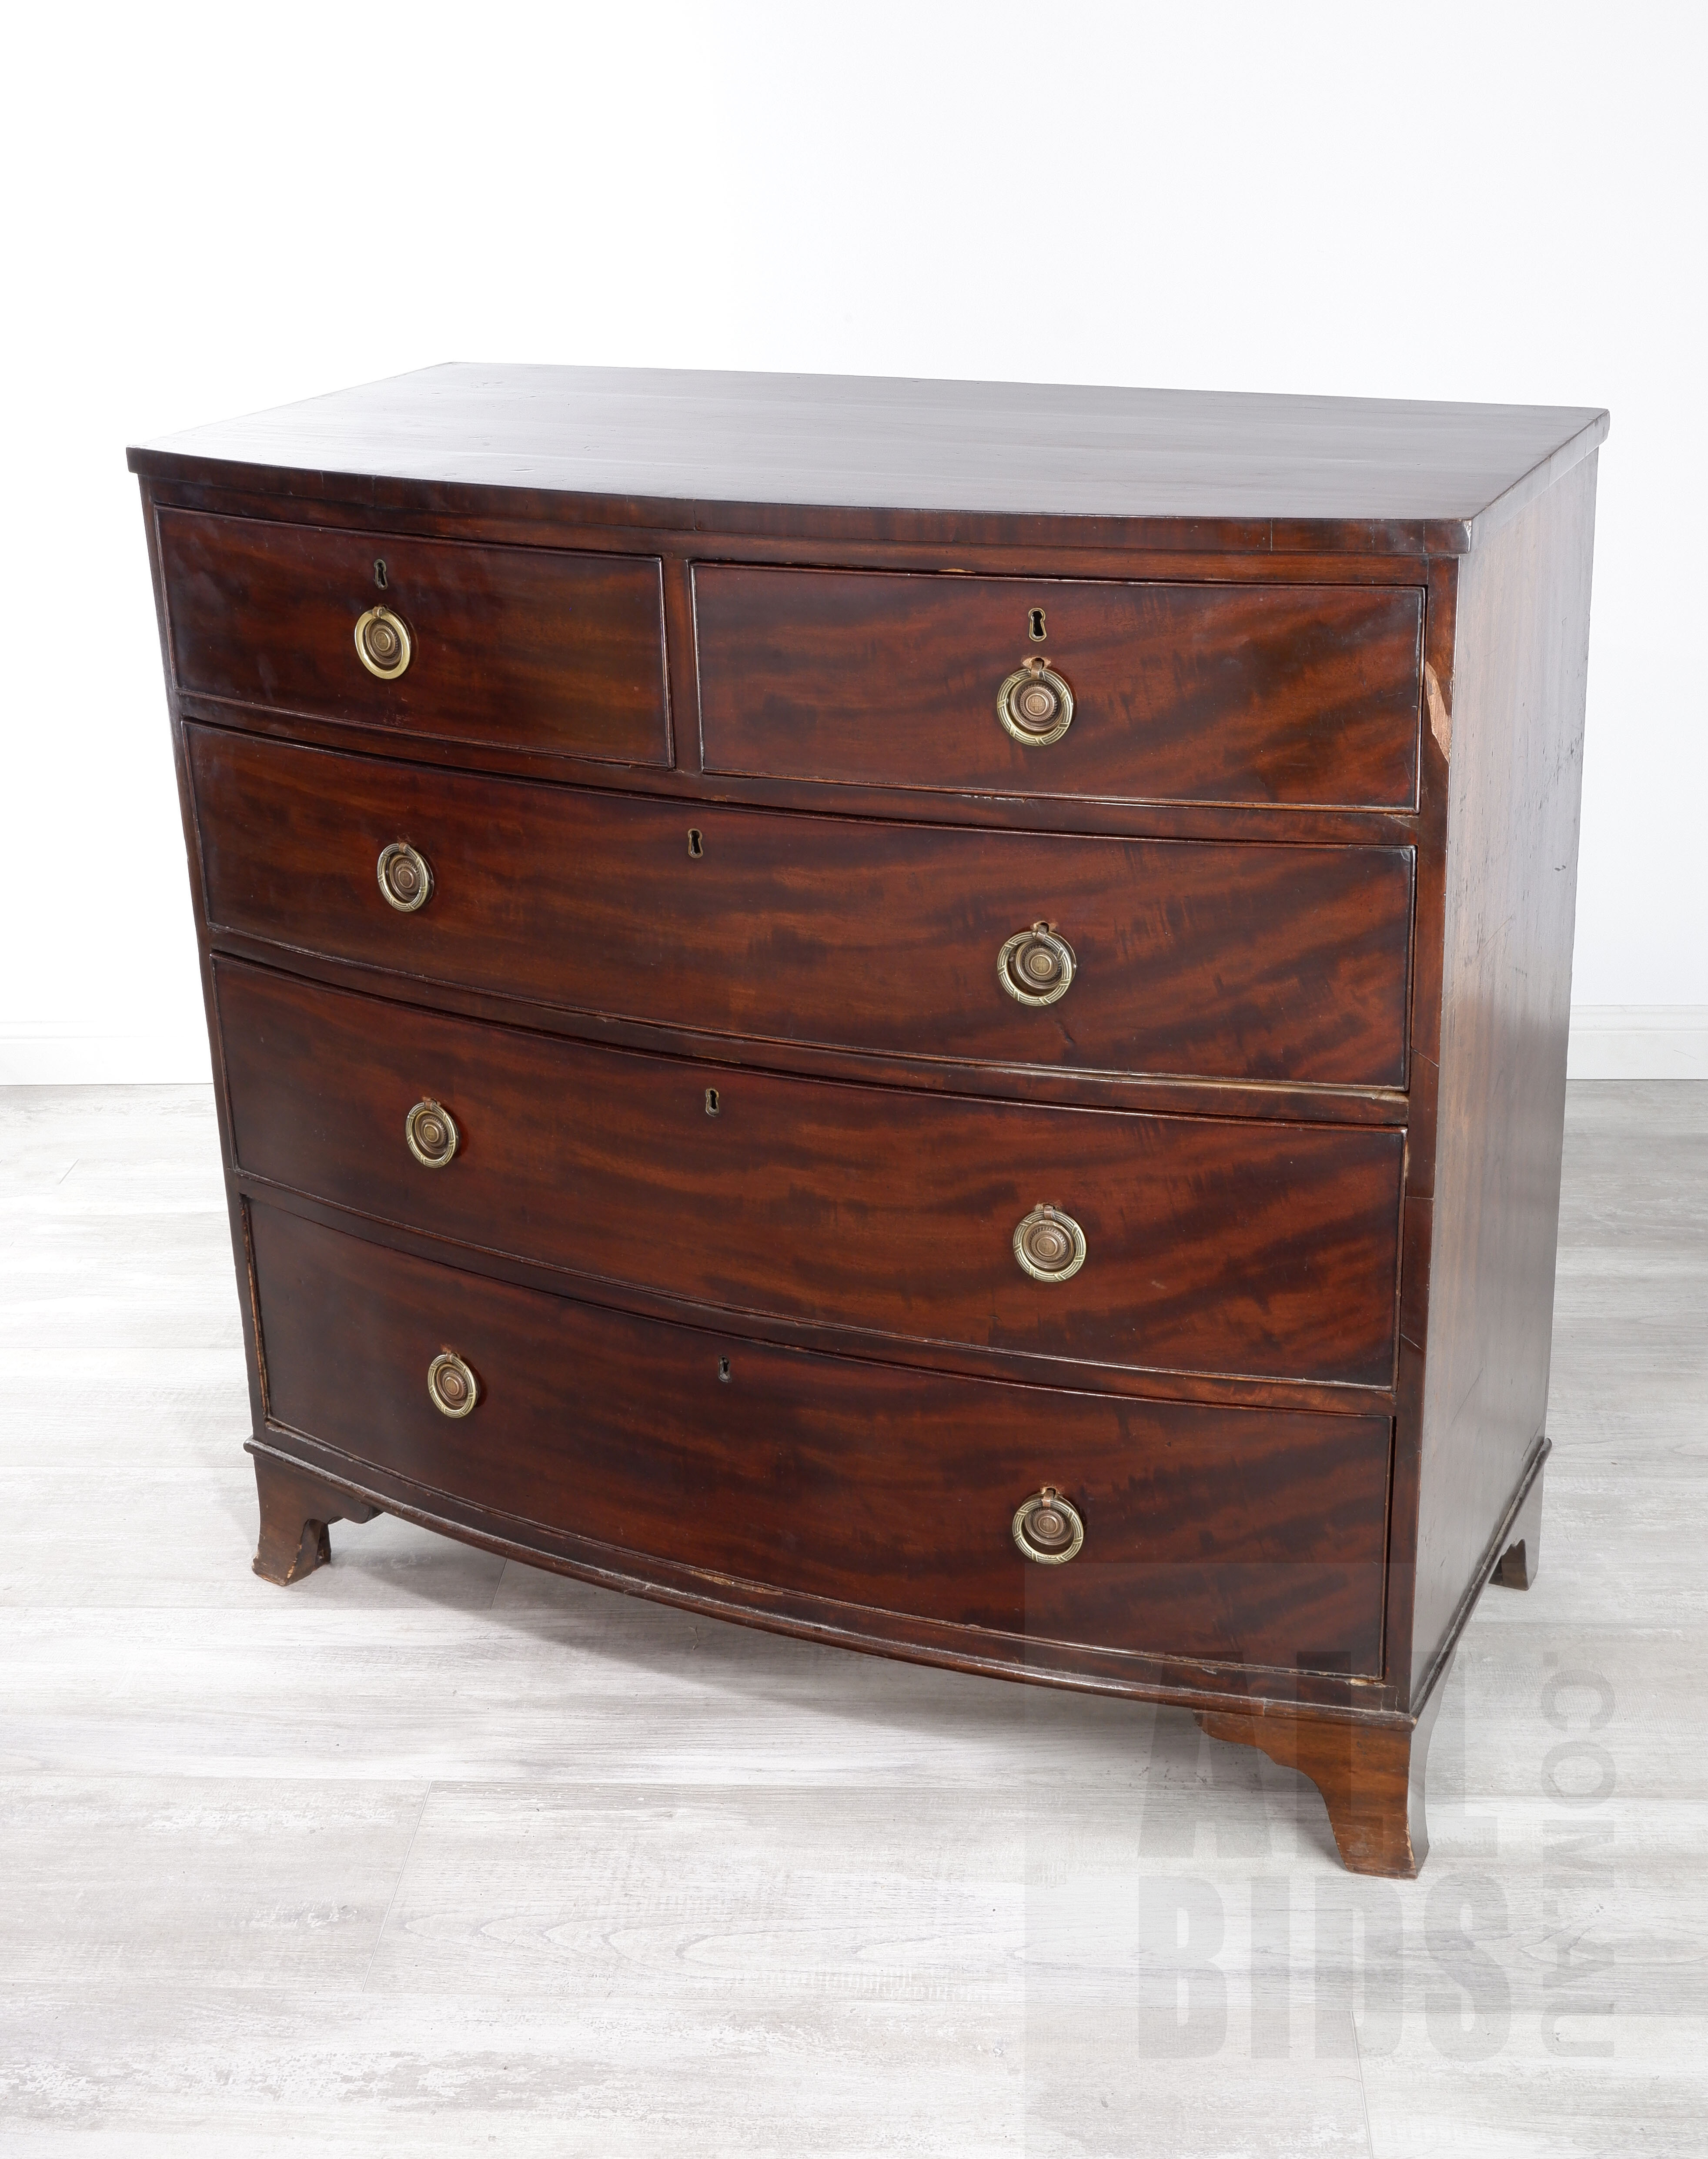 'George III Bow Front Mahogany Chest of Drawers, Early to Mid 19th Century'